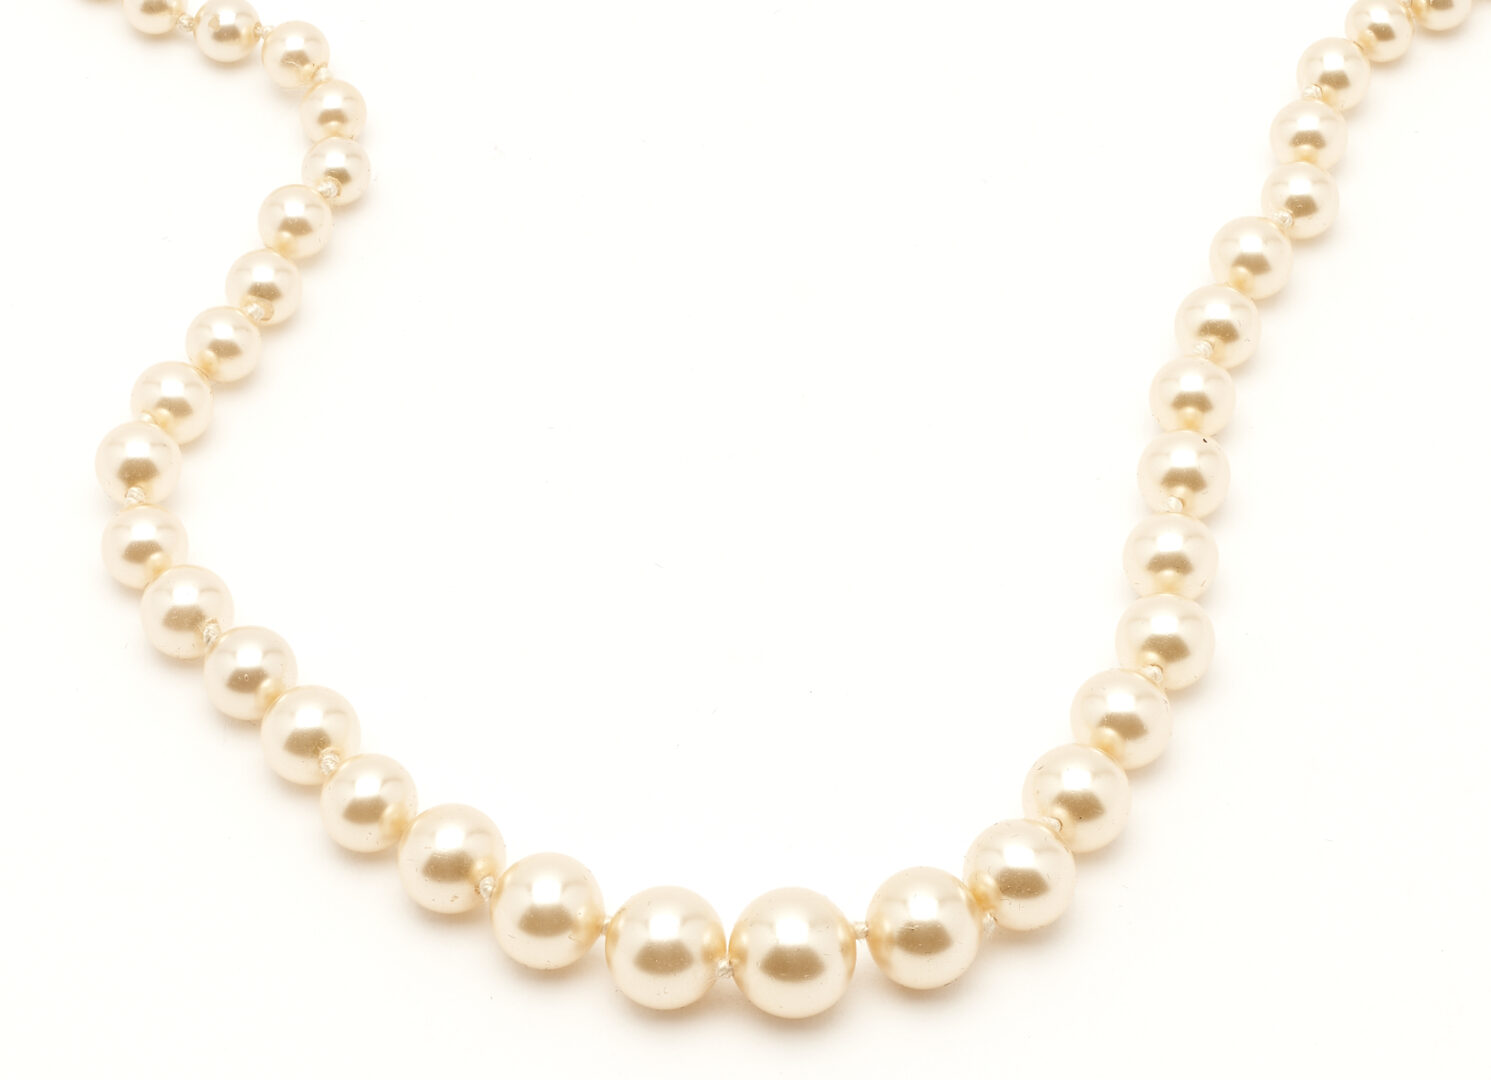 Lot 1139: 14K Graduated Pearl Necklace & Victorian Gemstone Pin